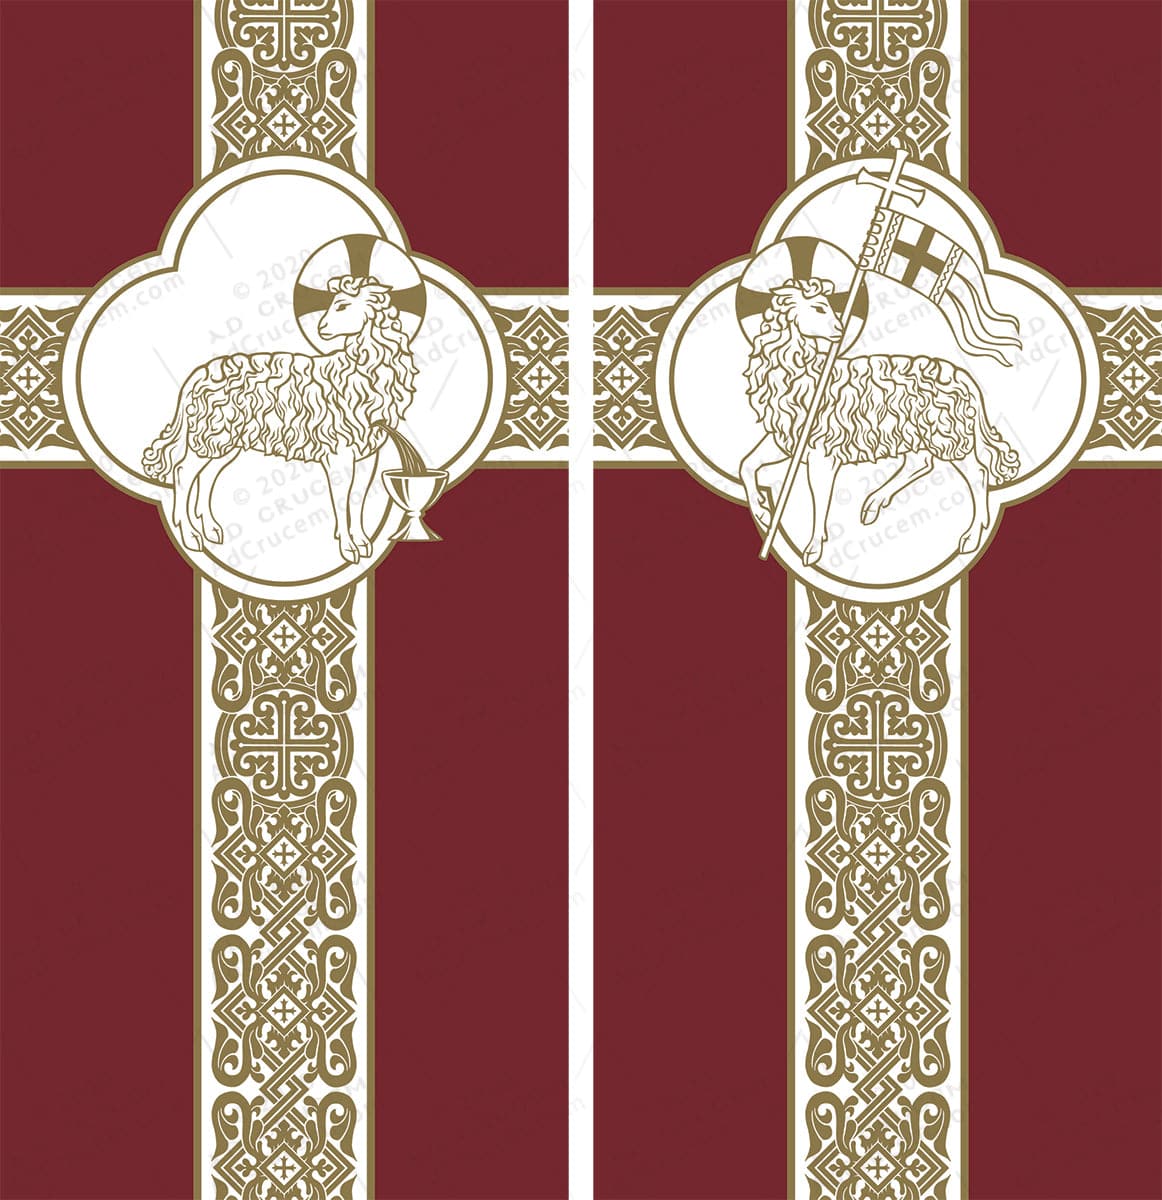 Ad Crucem Agnus Dei Red Banners Set of Two